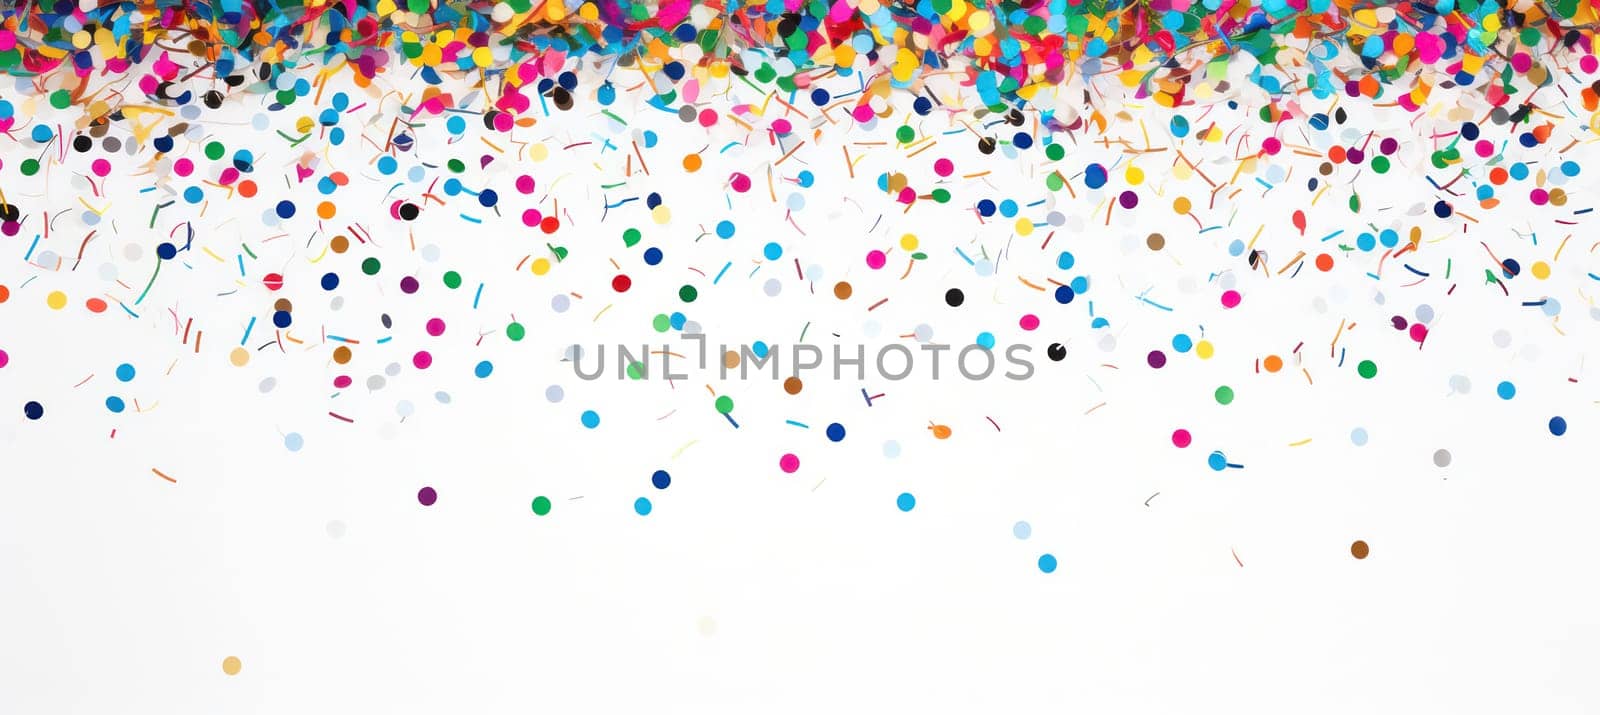 Colorful Celebrations: A Festive Confetti Extravaganza on a Bright Abstract Party Background